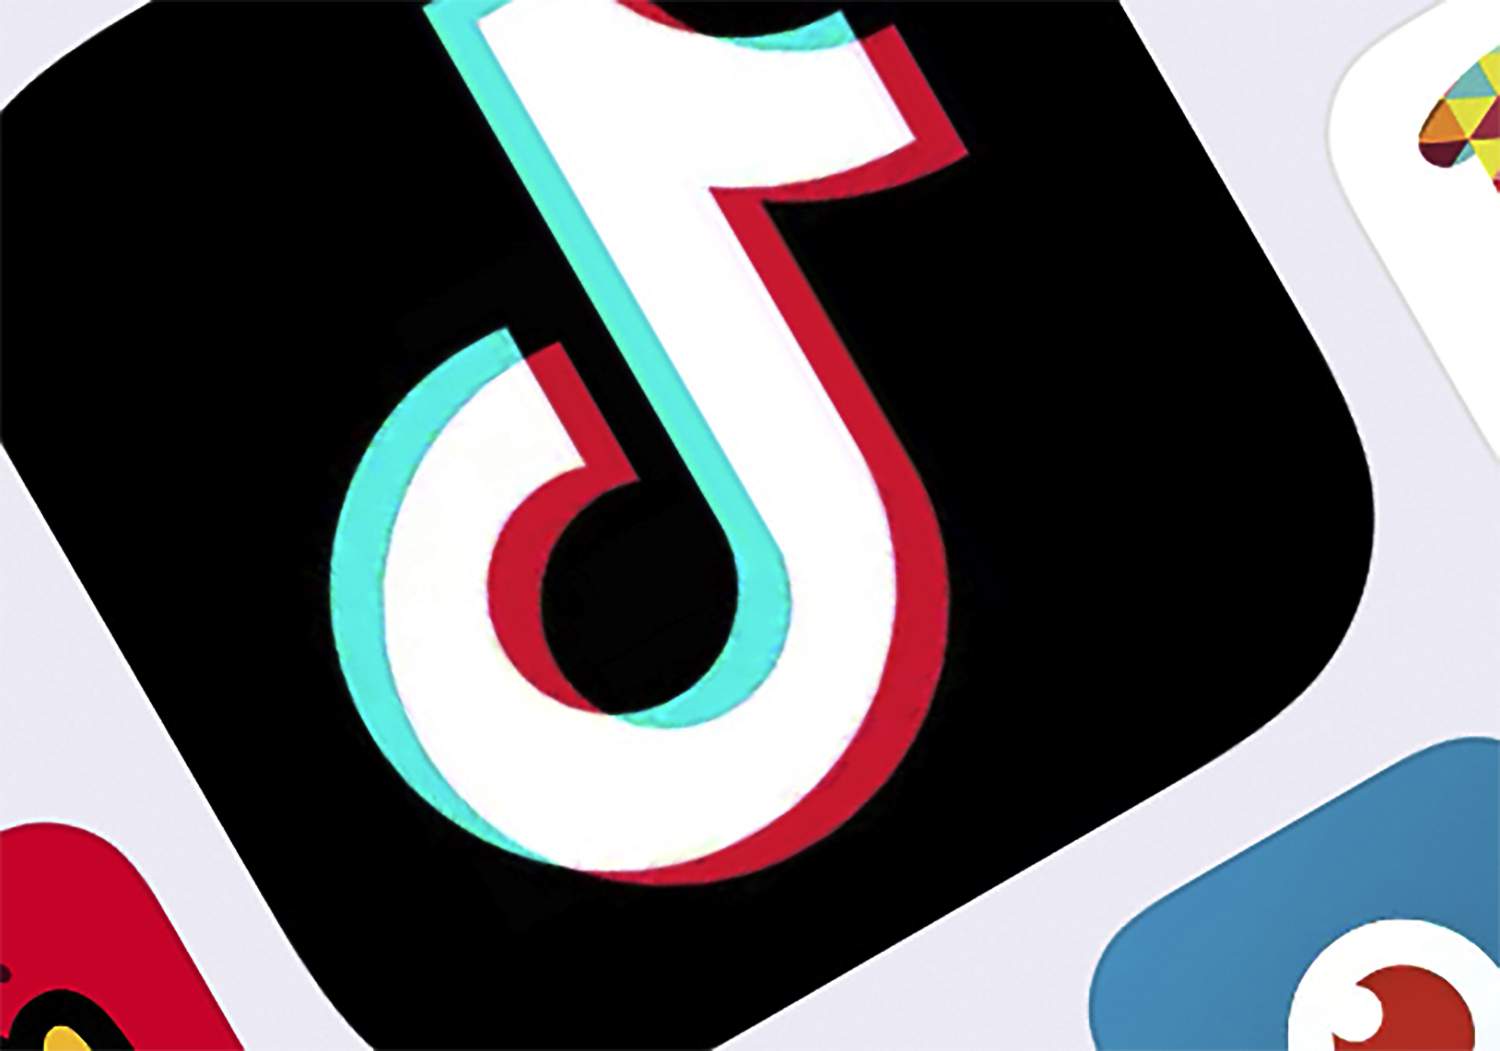 ’We’re not planning on going anywhere,’: TikTok manager says in wake of President Trump’s ban threat